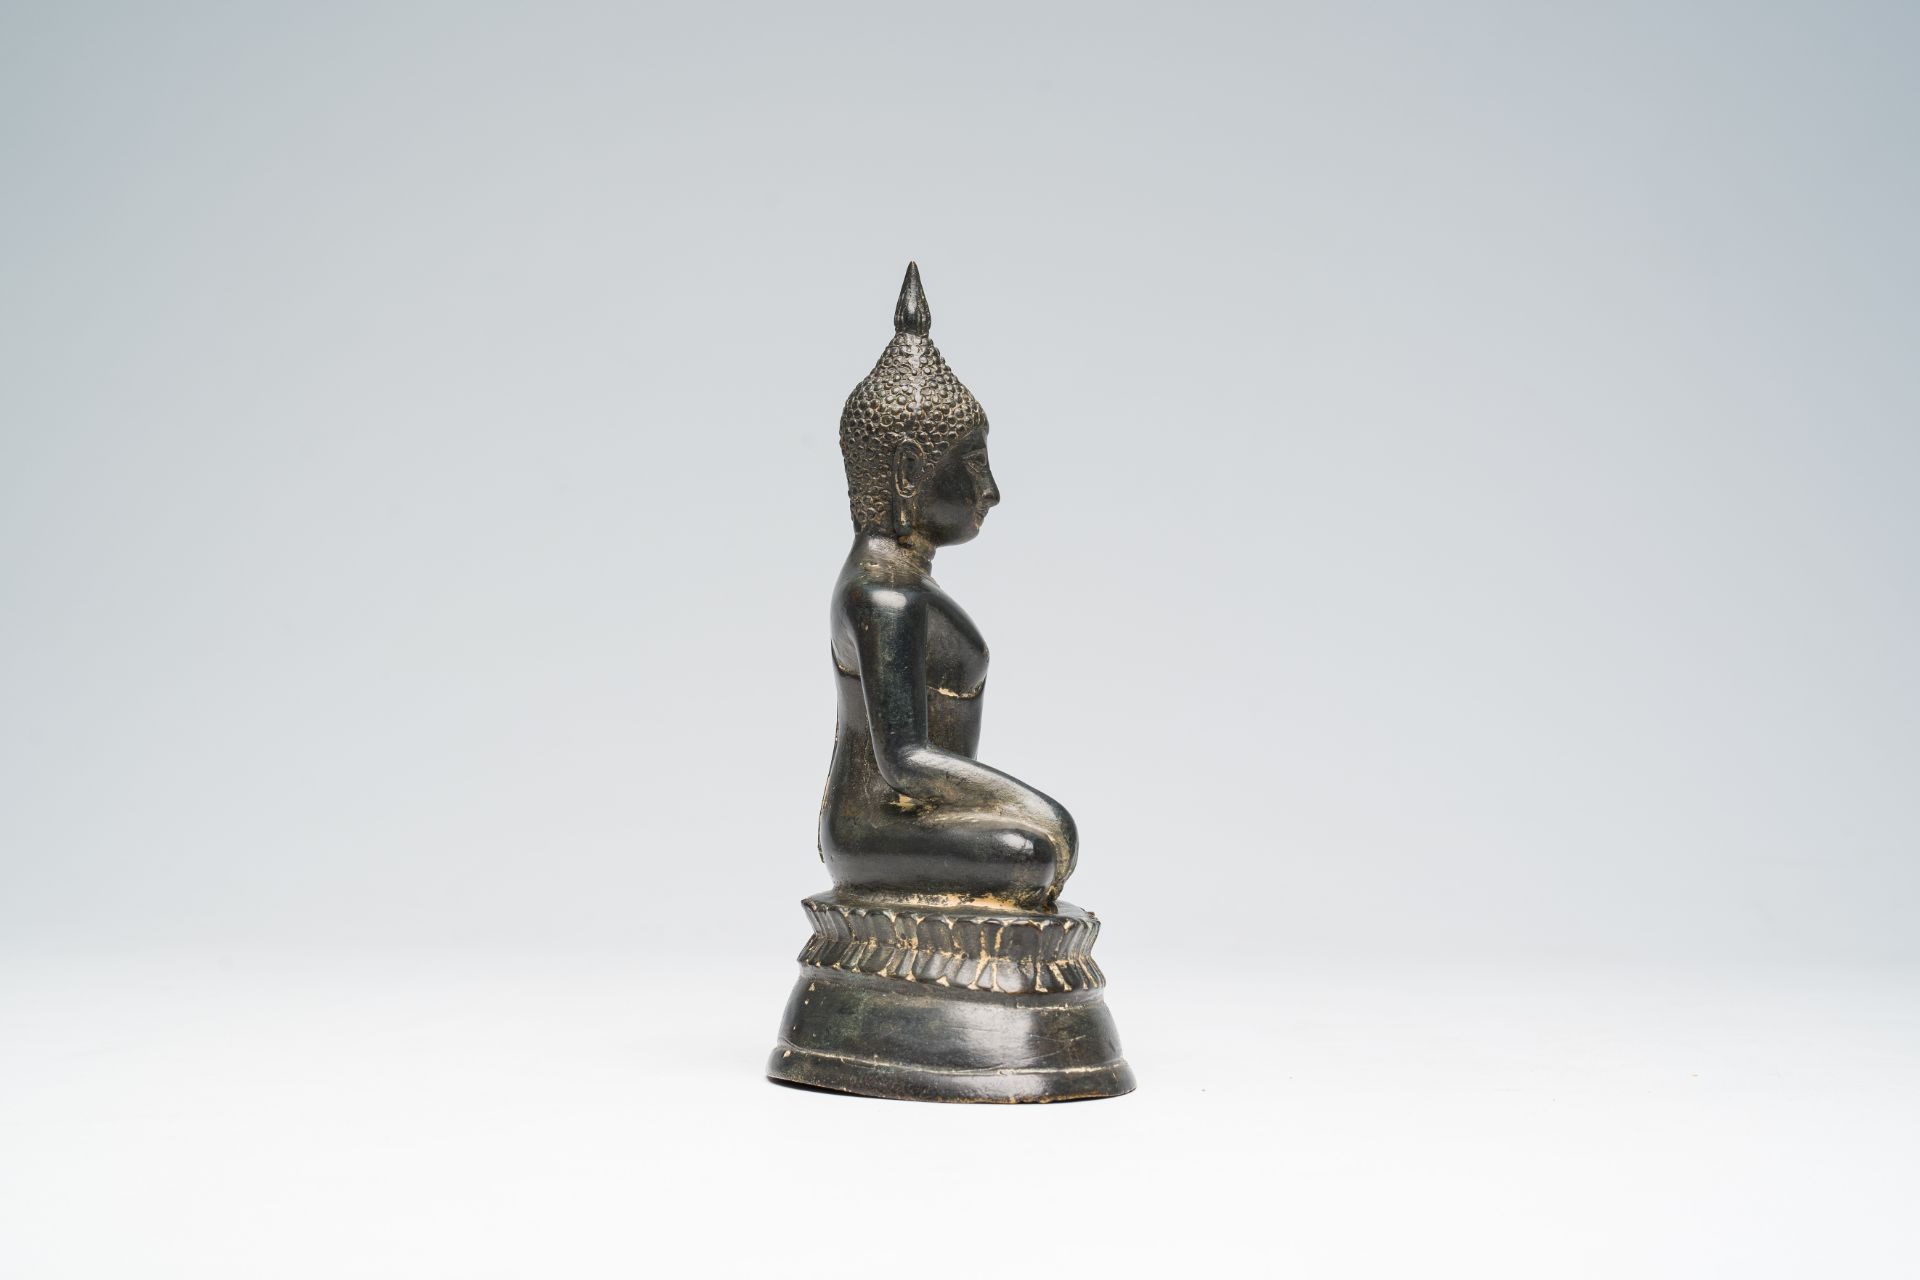 A bronze sculpture of the seated Buddha, Southeast Asia, 18th/19th C. - Image 5 of 7